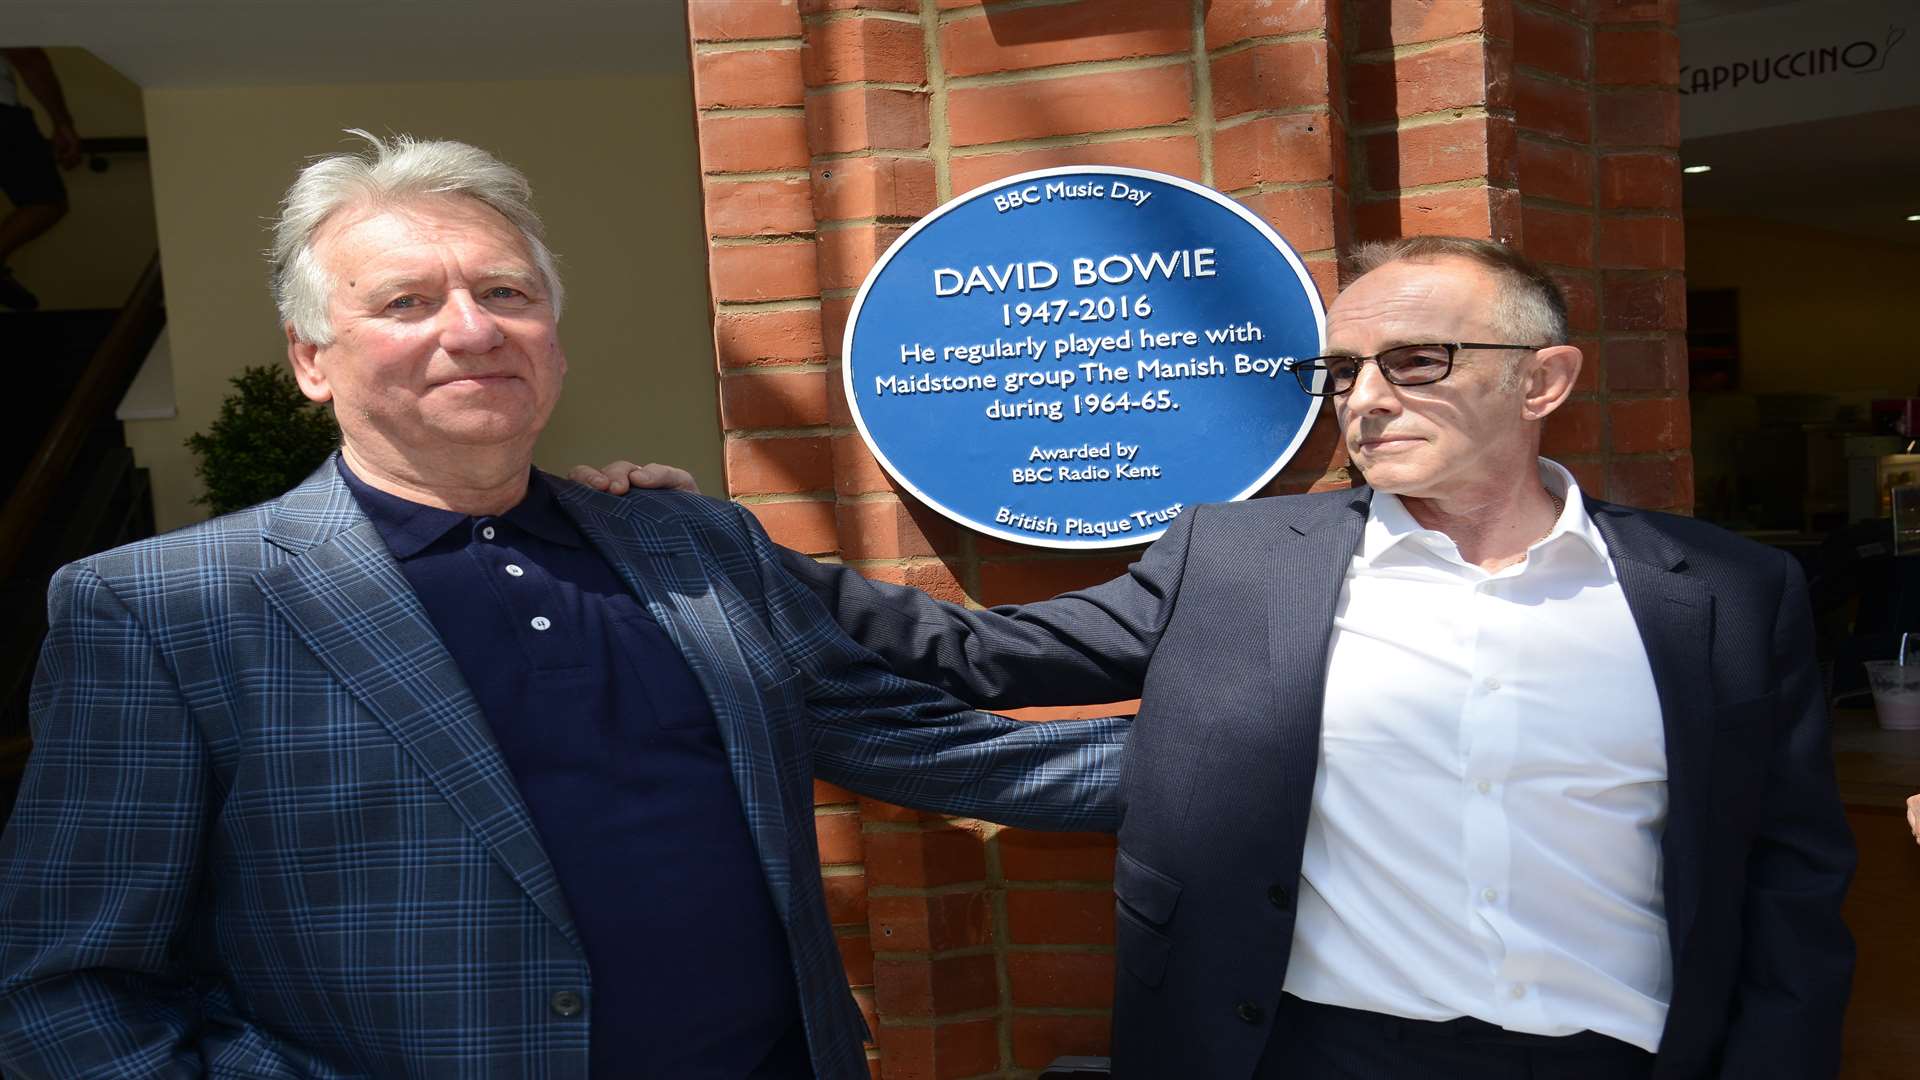 Bob Solly and Topper Headon, former drummer with The Clash, unveiling of the blue plaque to David Bowie who played with the Manish Boys at the Royal Star Hotel in Maidstone.